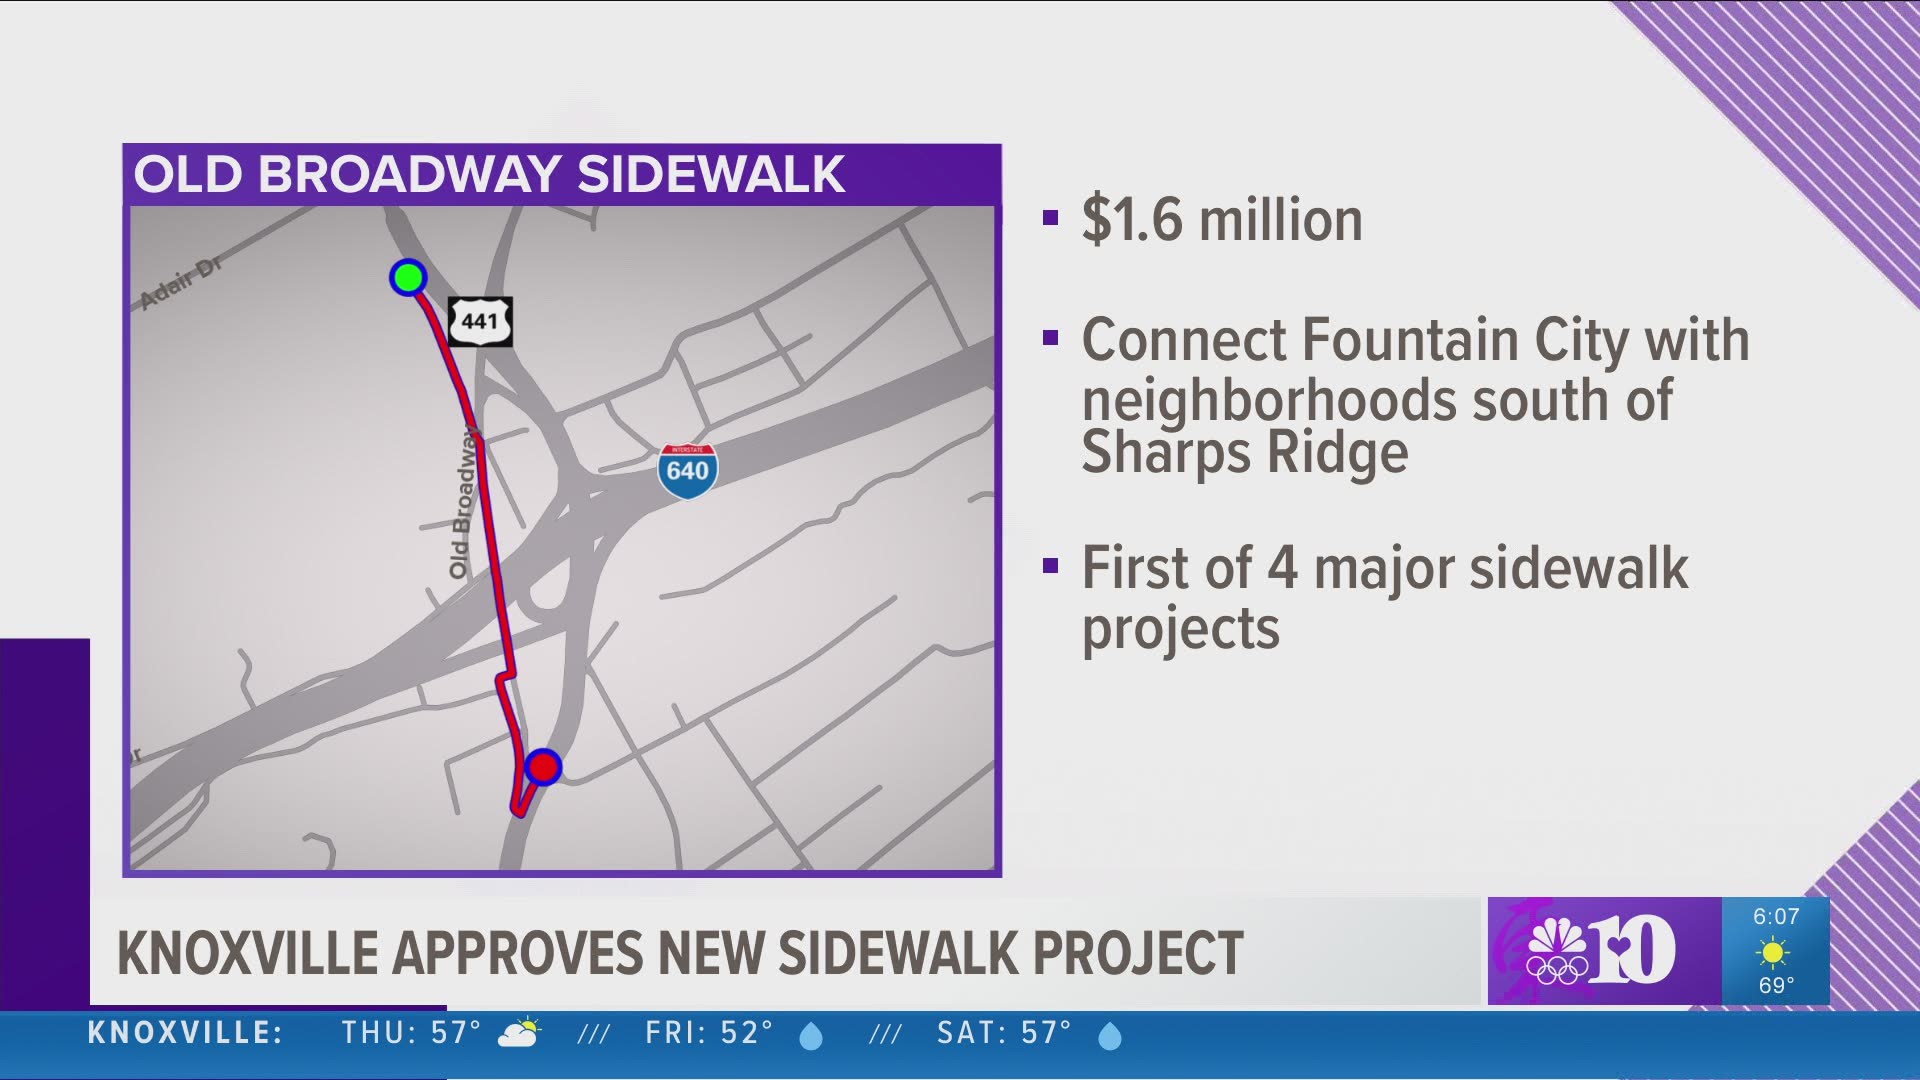 The city of Knoxville is investing more than $1.5 million to build new sidewalks on old Broadway in north Knoxville.